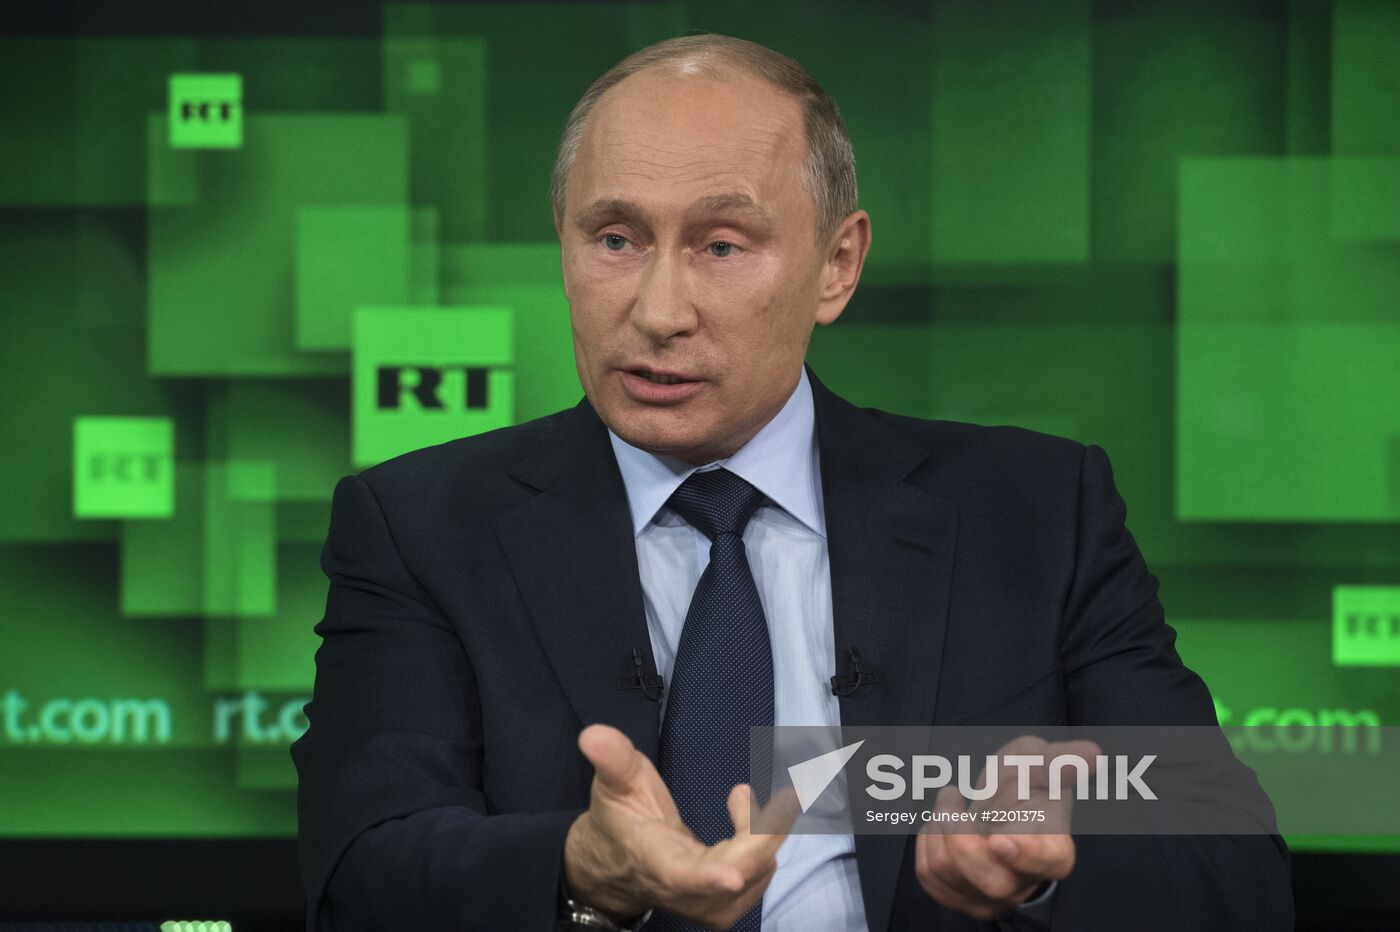 Vladimir Putin visits Russia Today television channel